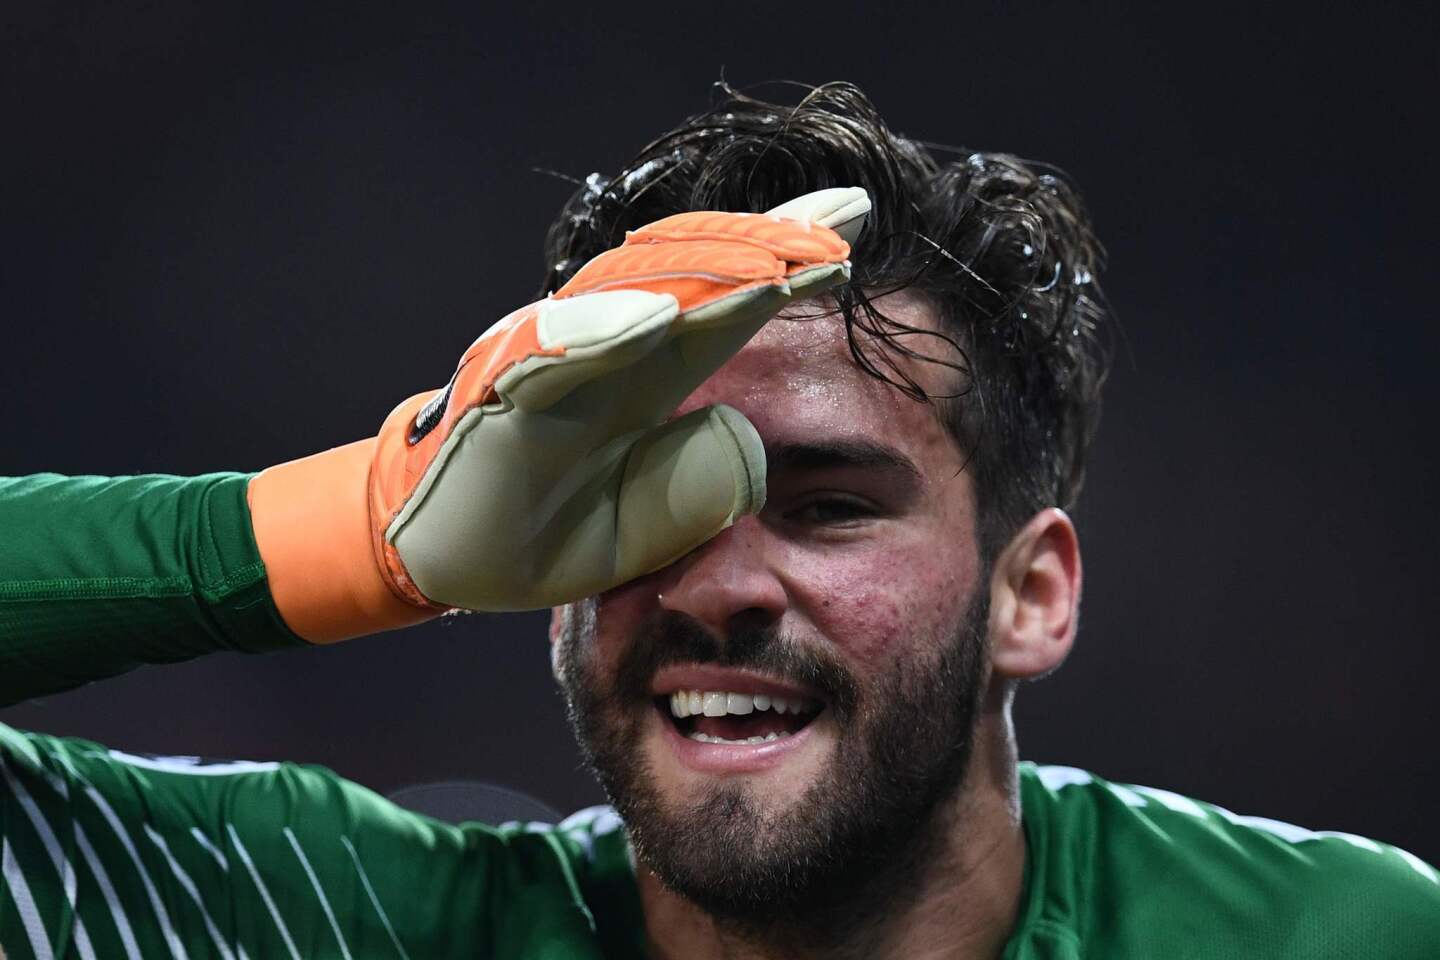 AS Roma's Brazilian goalkeeper Alisson Becker celebrates his team's victory at the end of the UEFA Champions League quarter-final second leg football match between AS Roma and FC Barcelona at the Olympic Stadium in Rome on April 10, 2018.